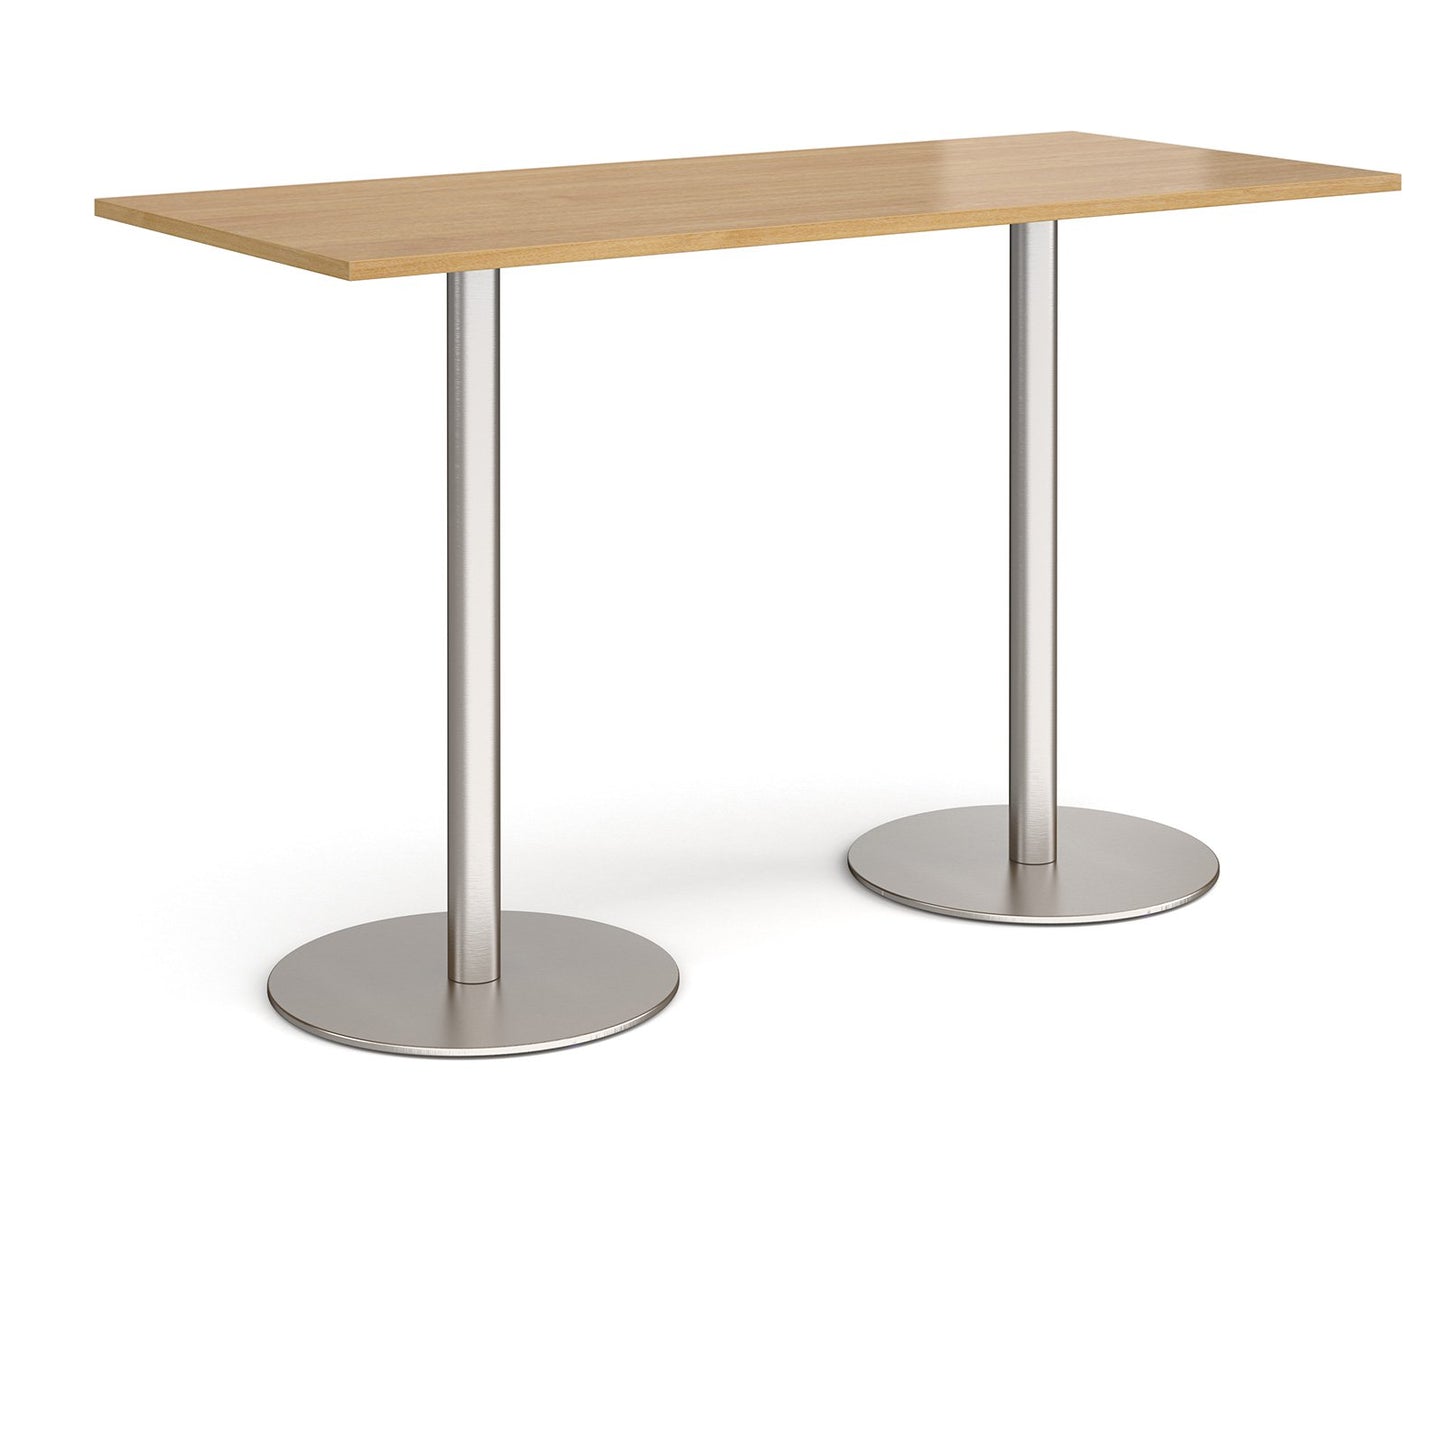 Monza rectangular poseur table with round bases